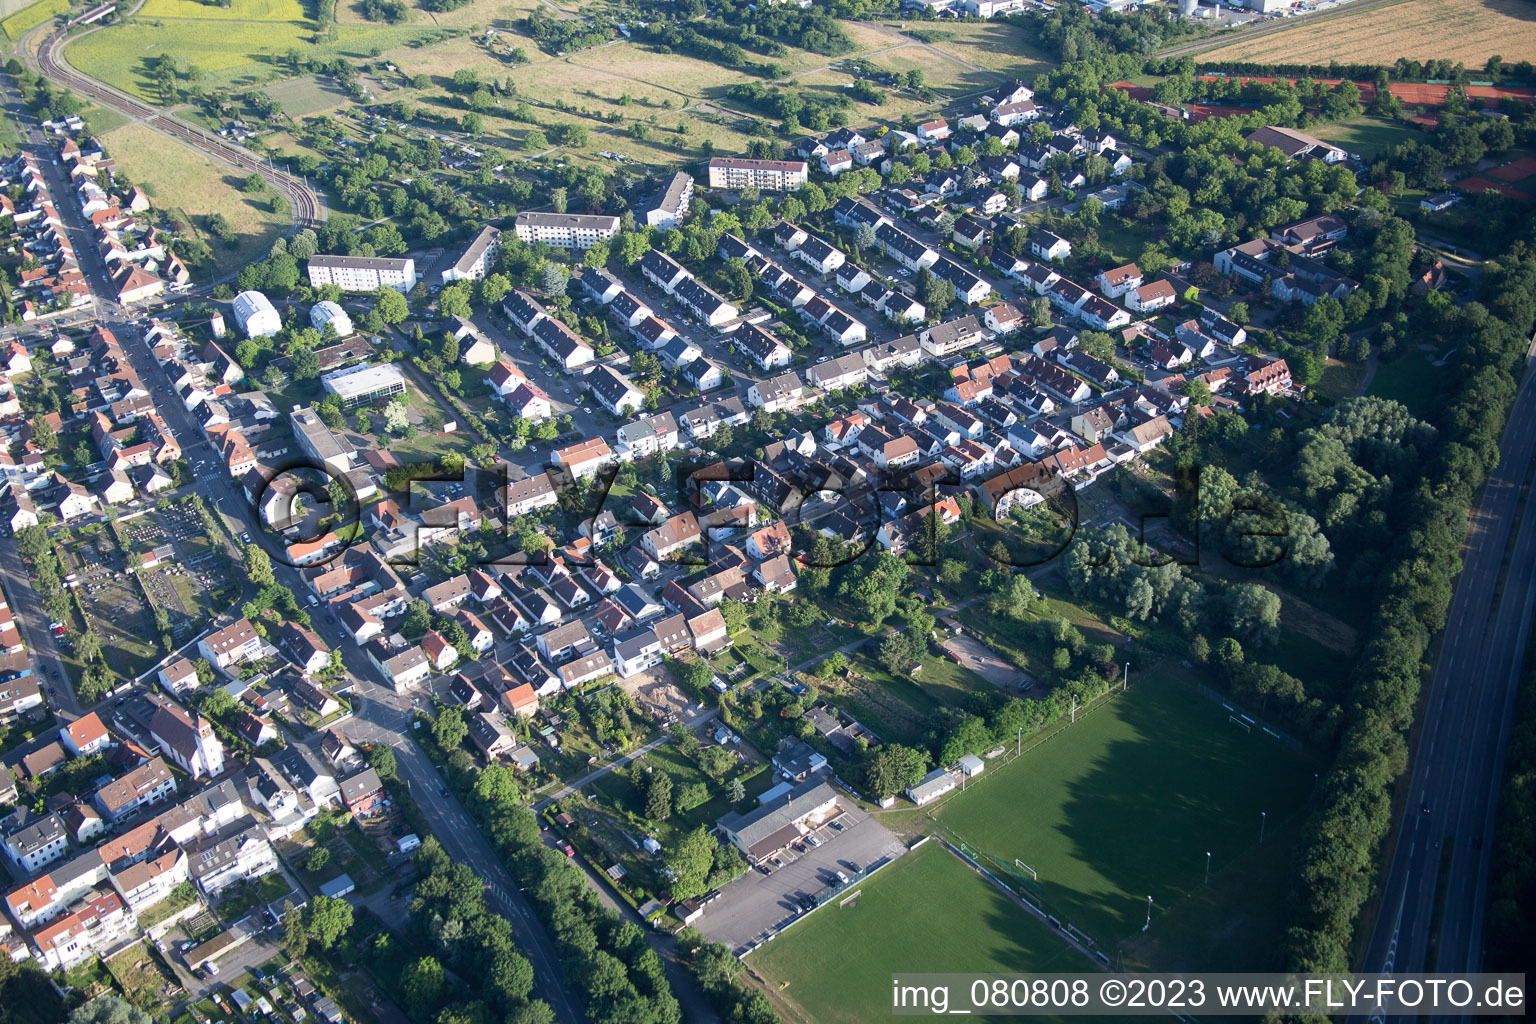 District Neureut in Karlsruhe in the state Baden-Wuerttemberg, Germany from the drone perspective